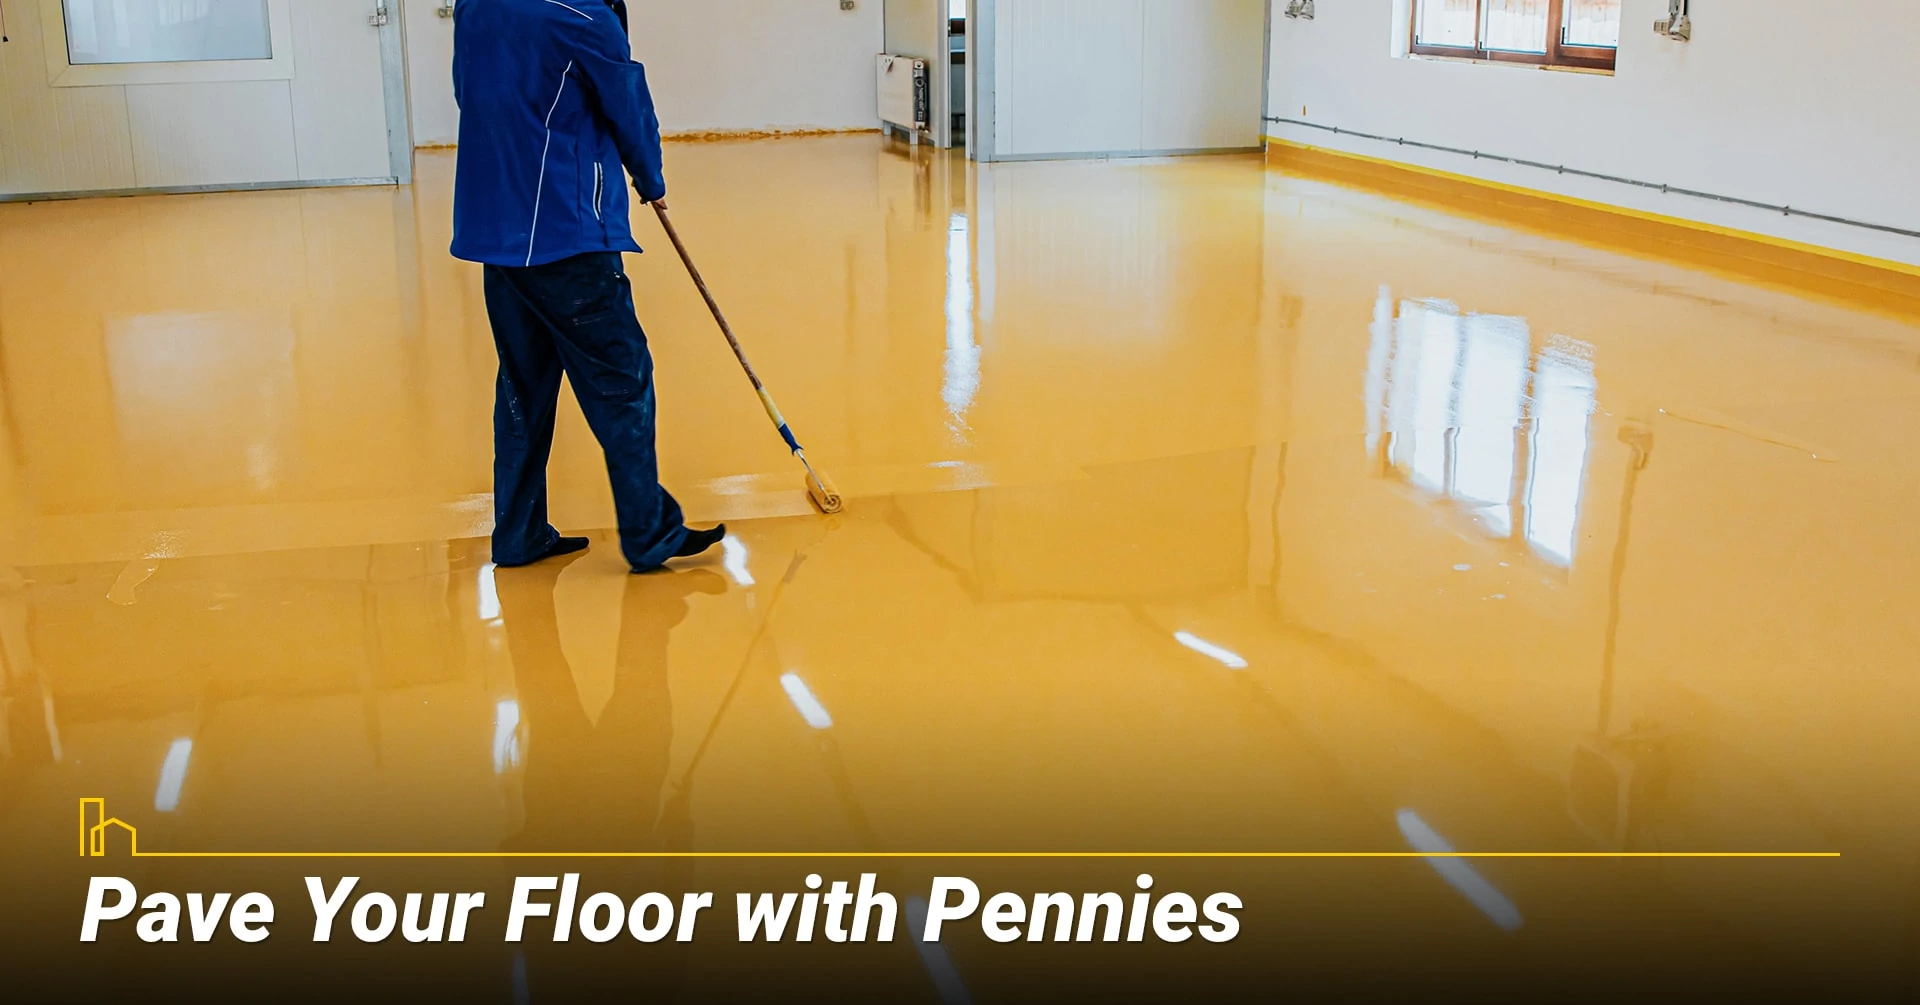 Pave Your Floor with Pennies, a new coat of paint on the floor